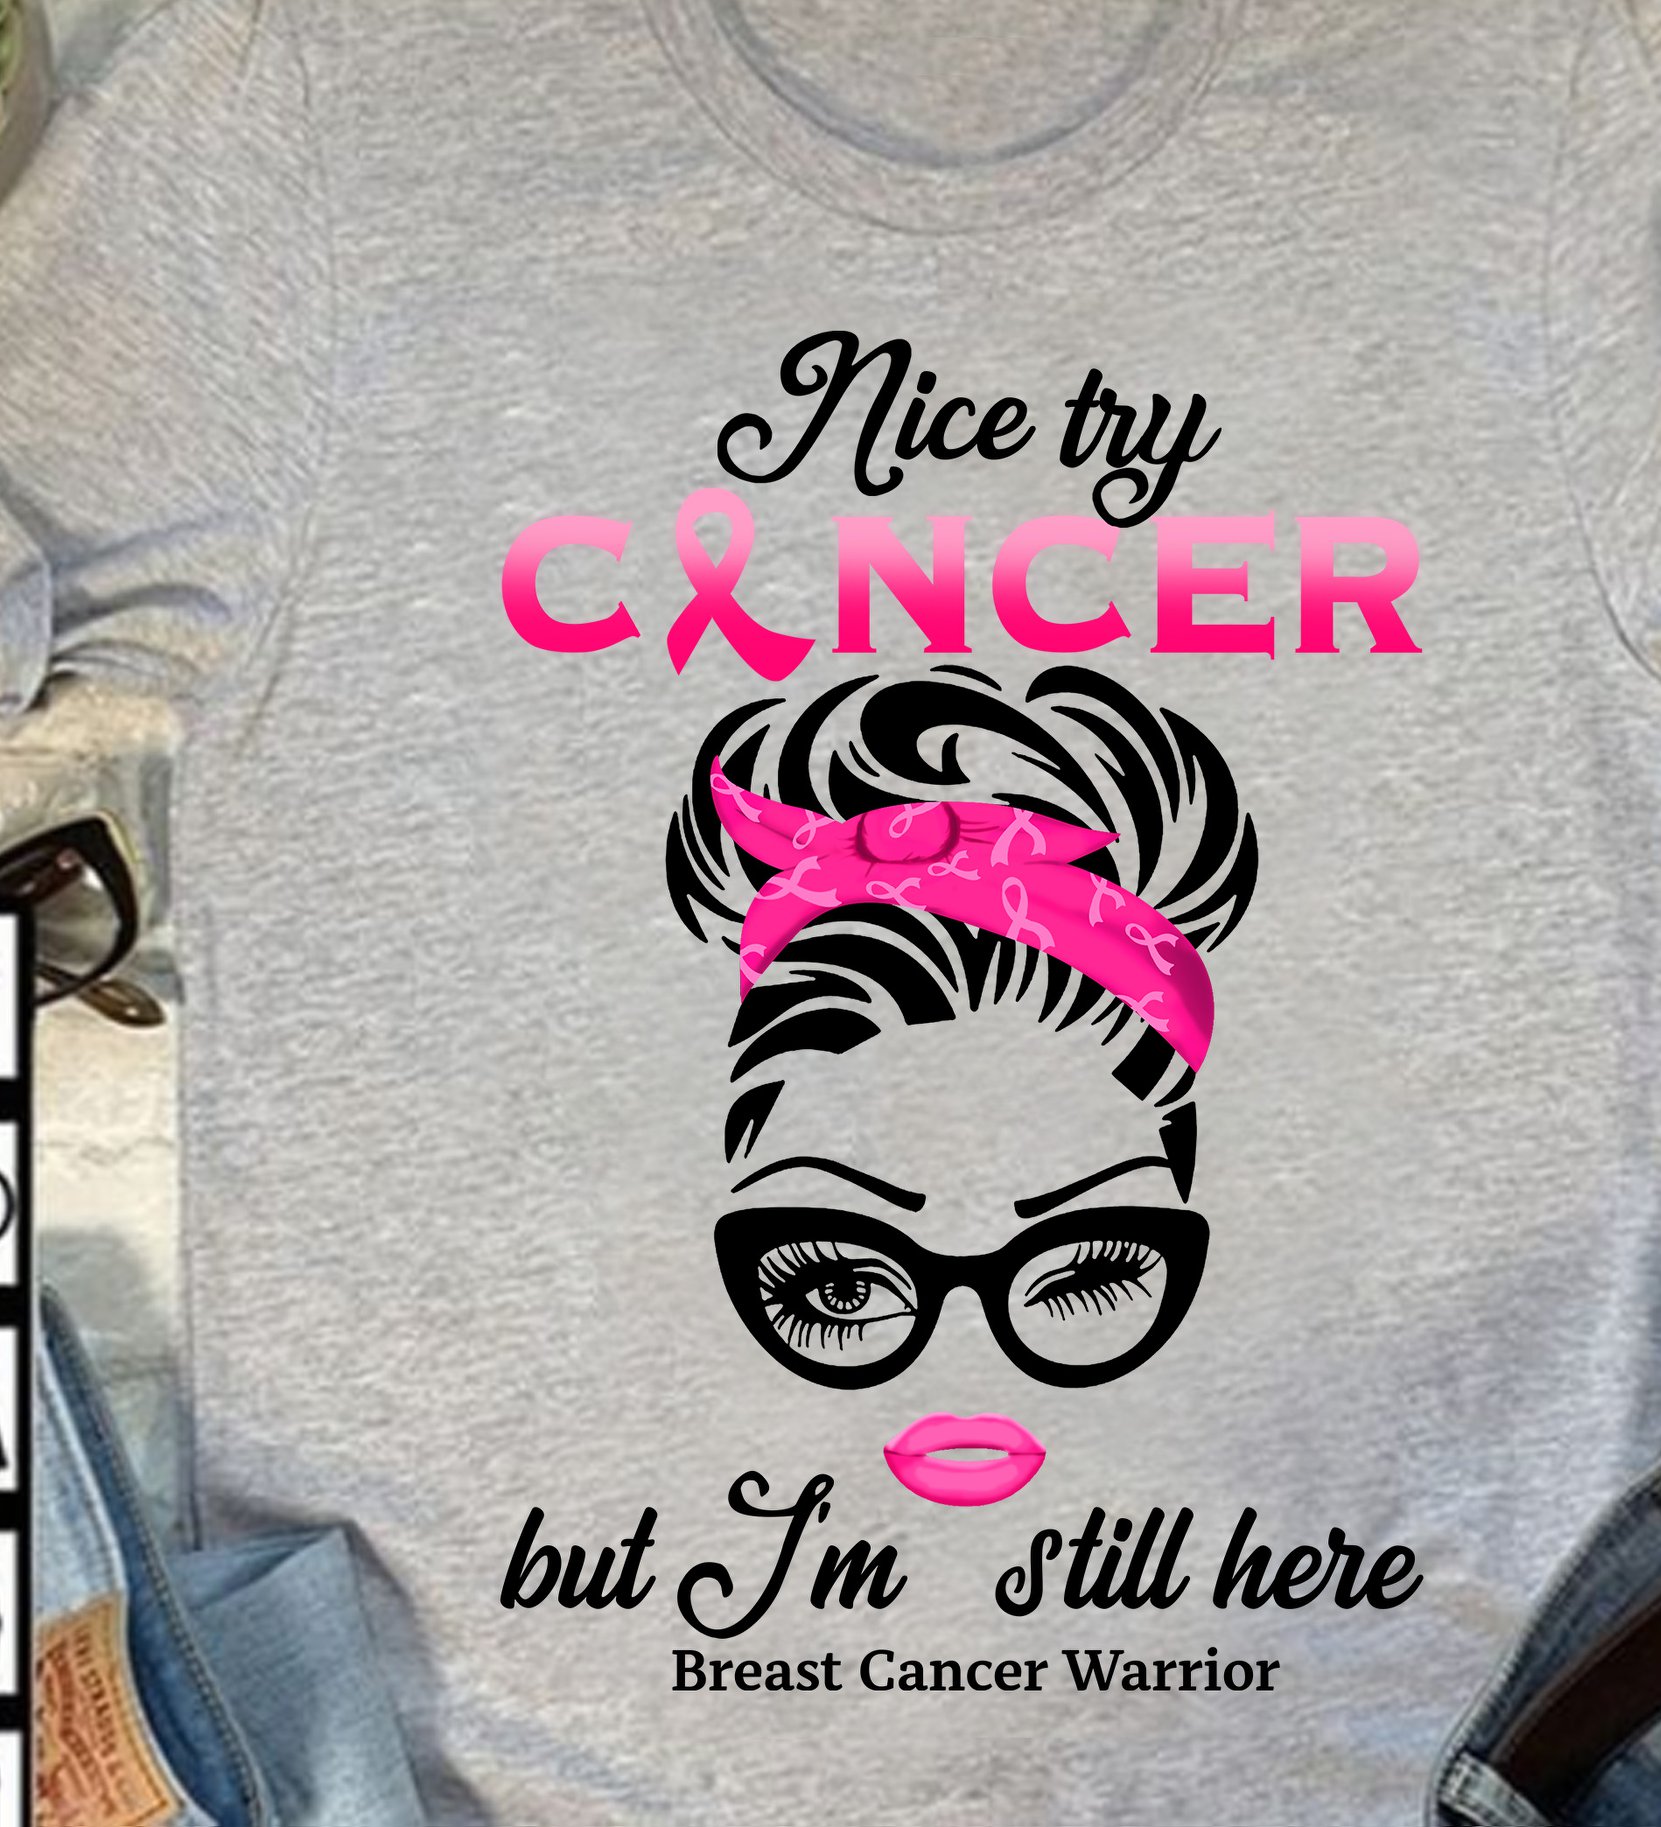 Nice try cancer but I'm still hear Breast cancer warrior - Woman face with sunglass